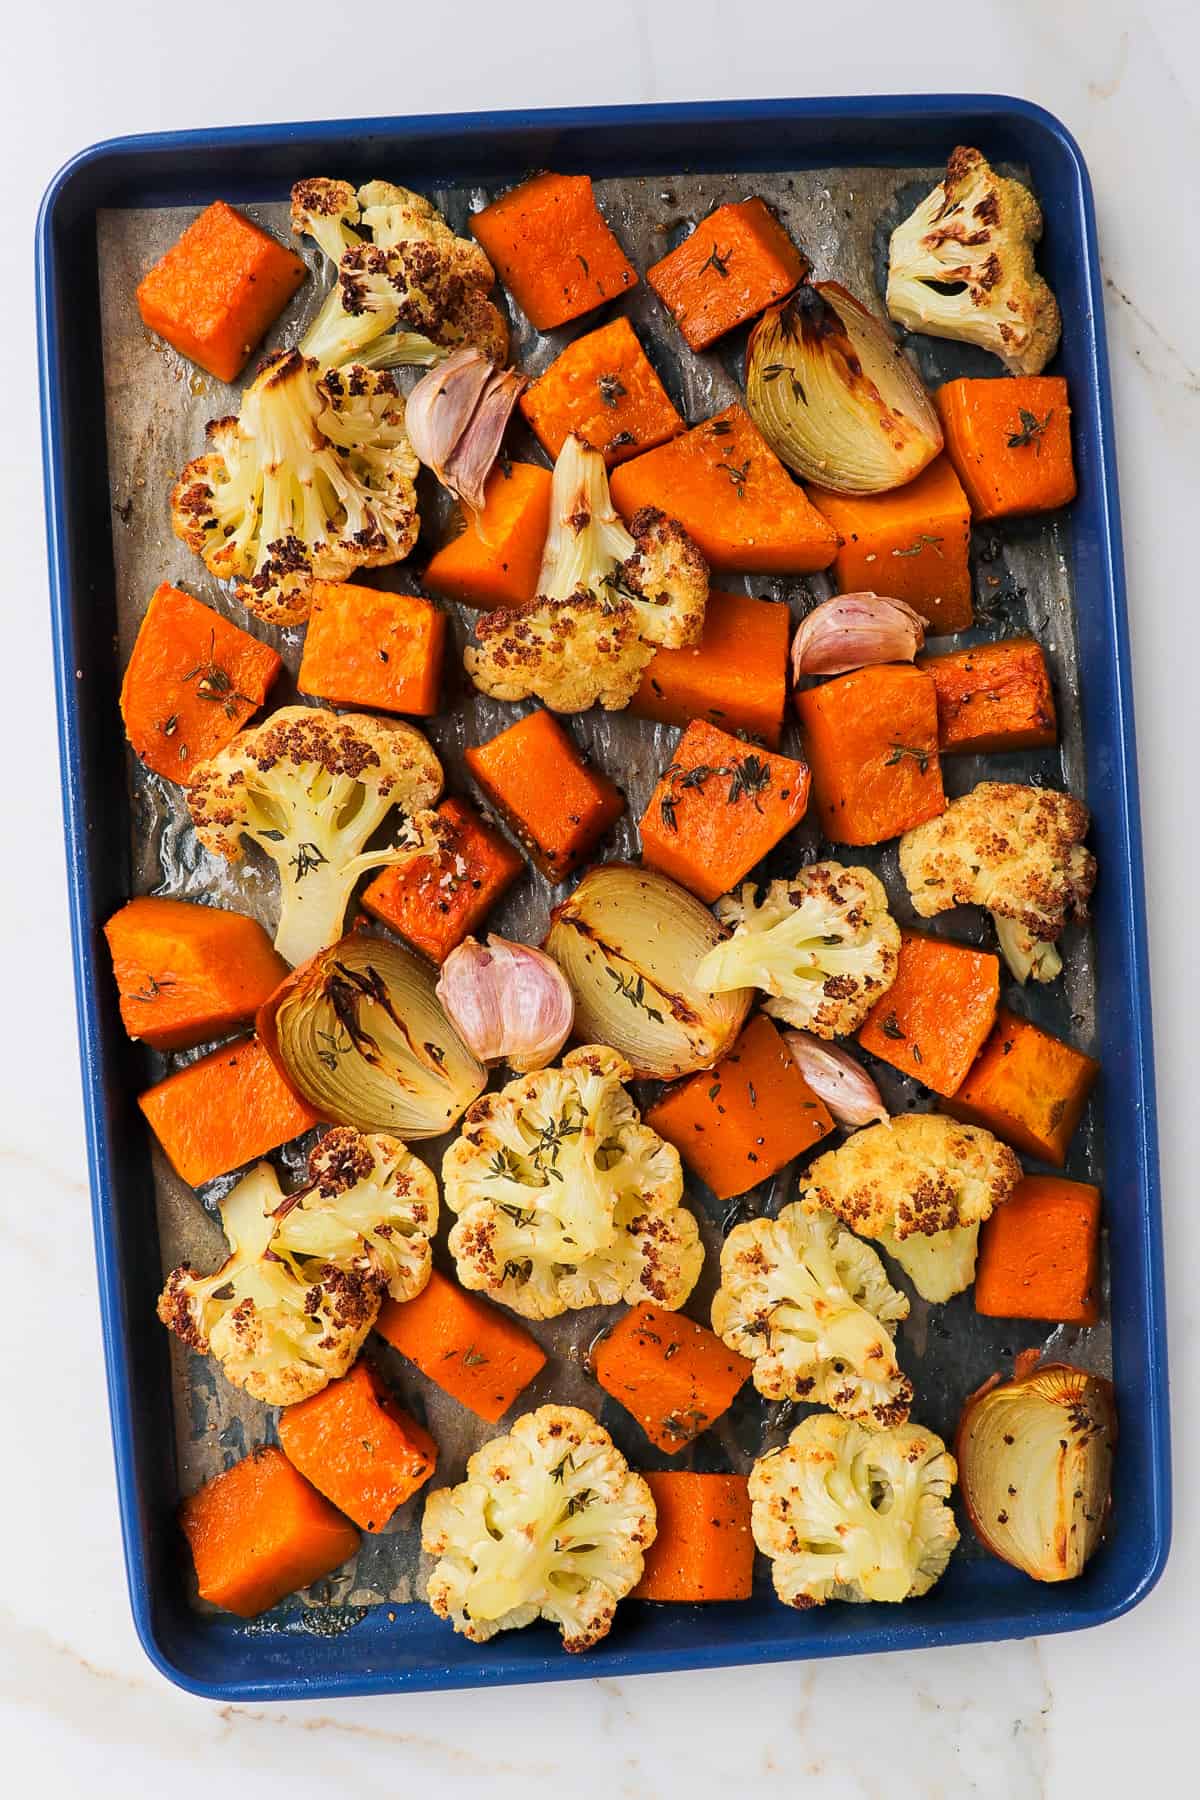 Roasted cauliflower florets, cubed pumpkin, onions and garlic on a baking tray.